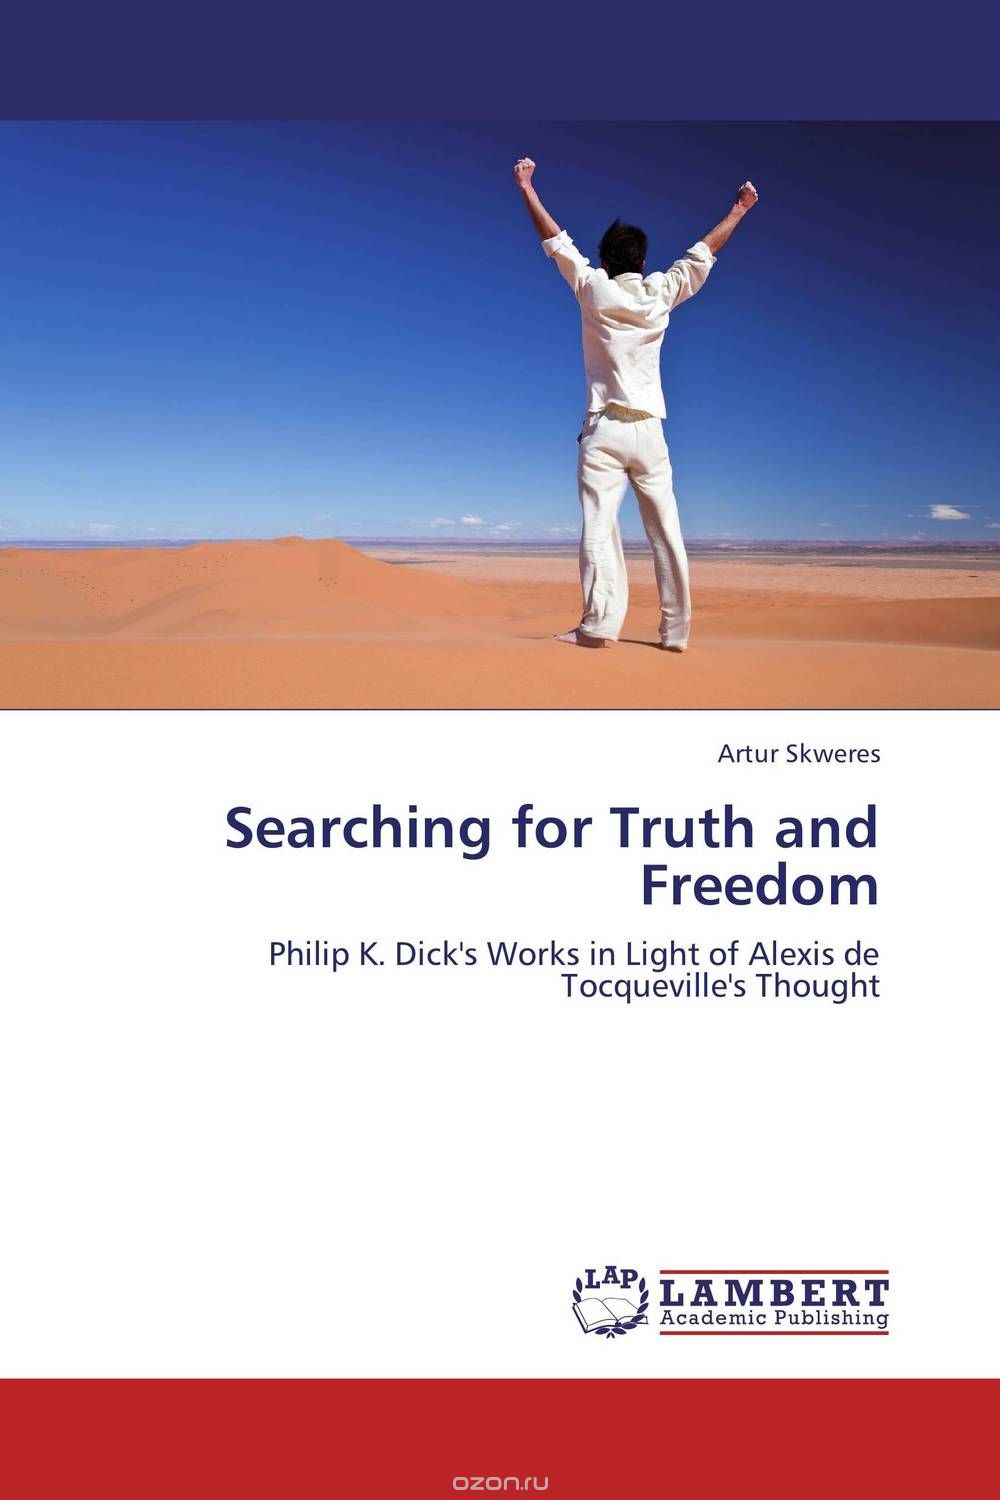 Скачать книгу "Searching for Truth and Freedom"